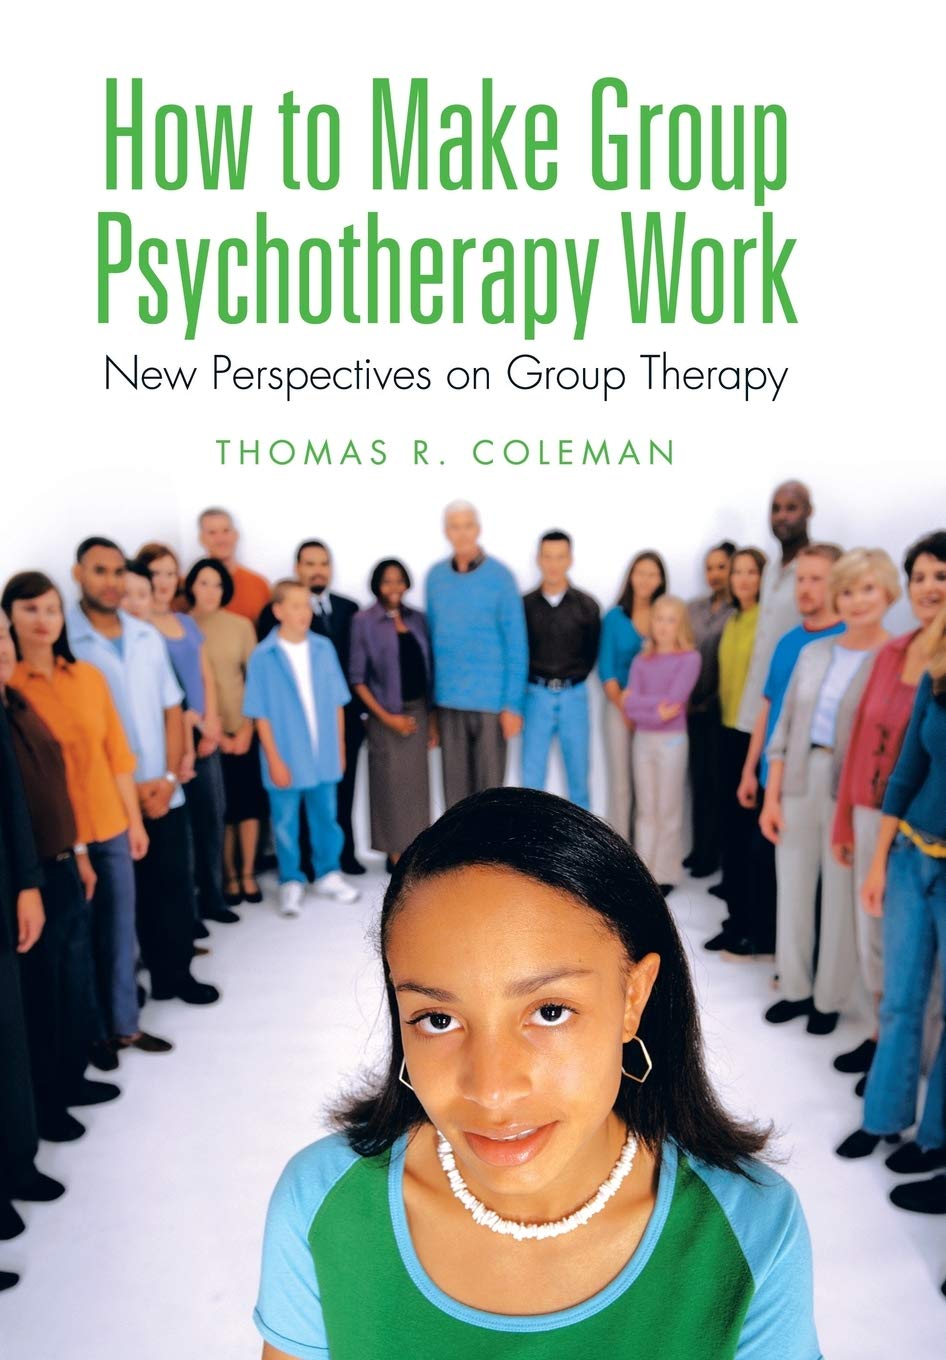 How to Make Group Psychotherapy Work - New Perspectives on Group Therapy - Book Recommended By Briana Lefman at Hamsa Healing Space